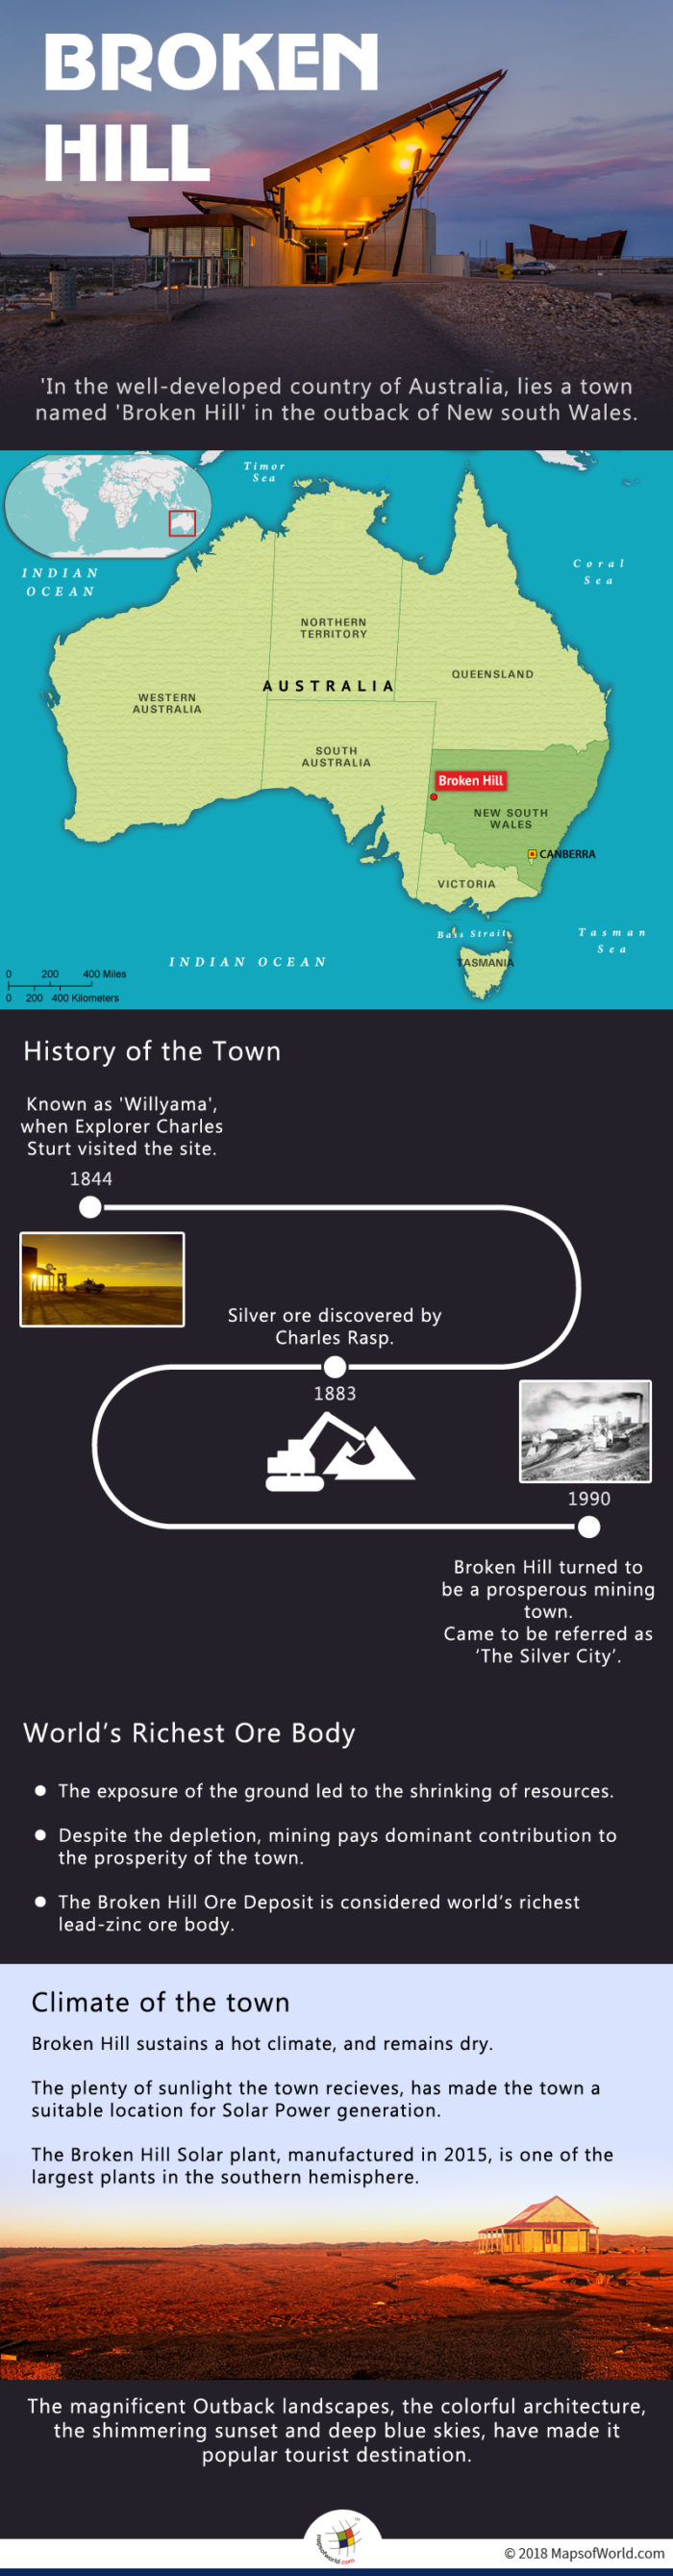 Broken Hill is The Longest Lived Mining City in The World